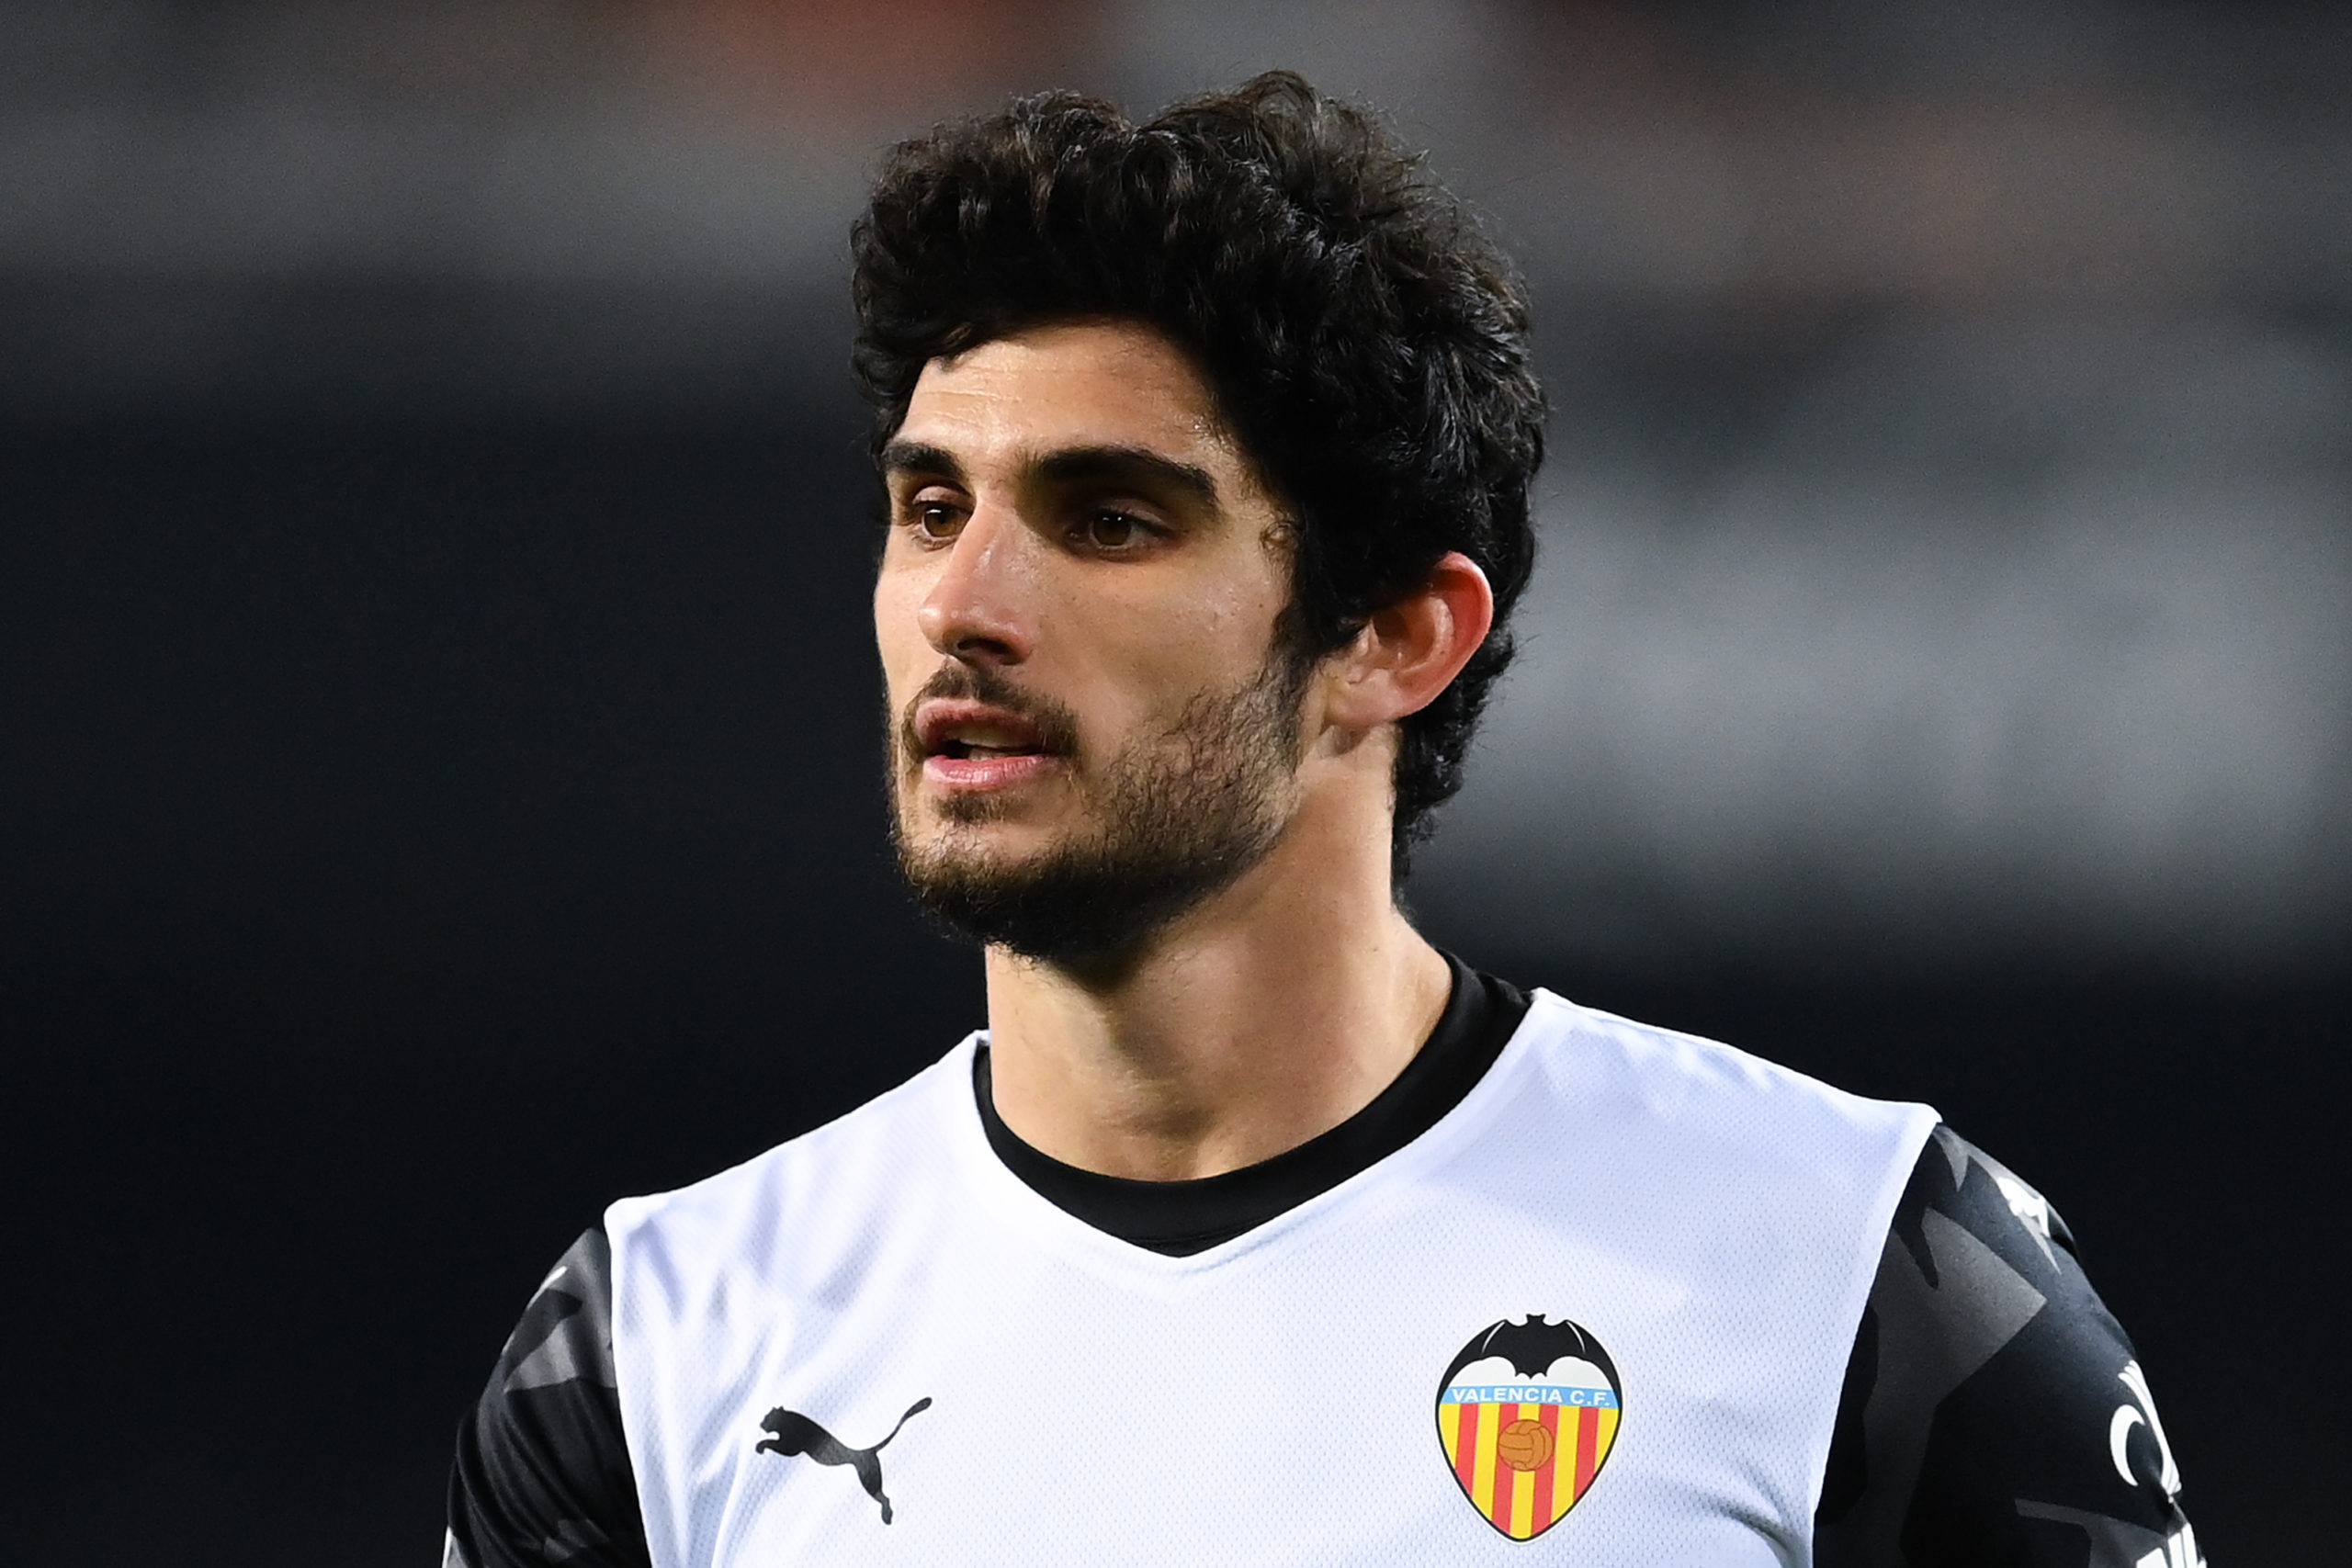 Gonçalo Guedes has been on the Roma radar for quite some time. It appears that the Giallorossi are indeed ready to open a negotiation to sign him.